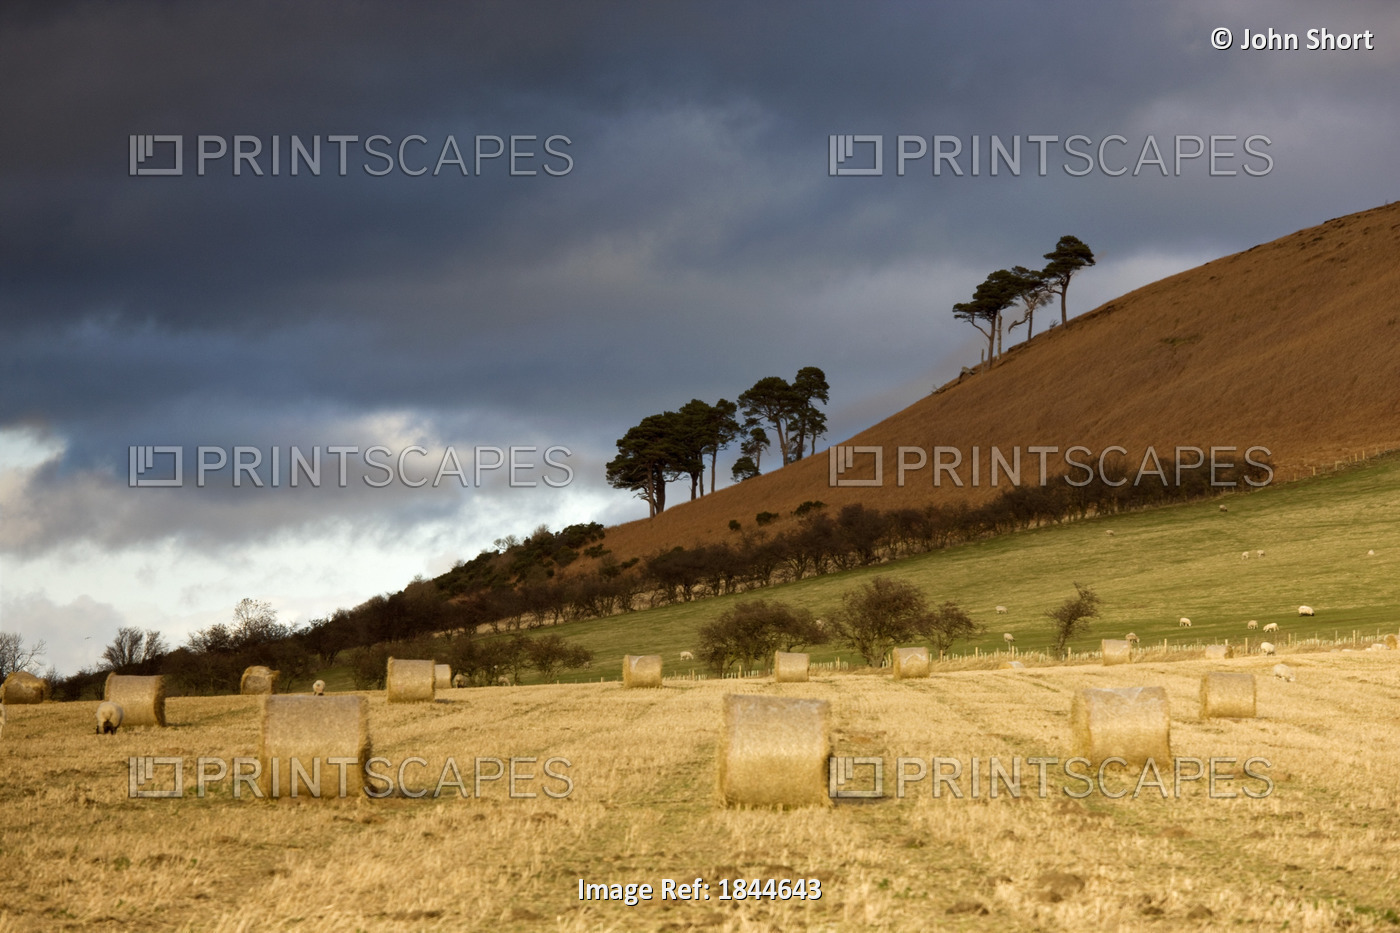 Hay Bales In A Field, Northumberland, England